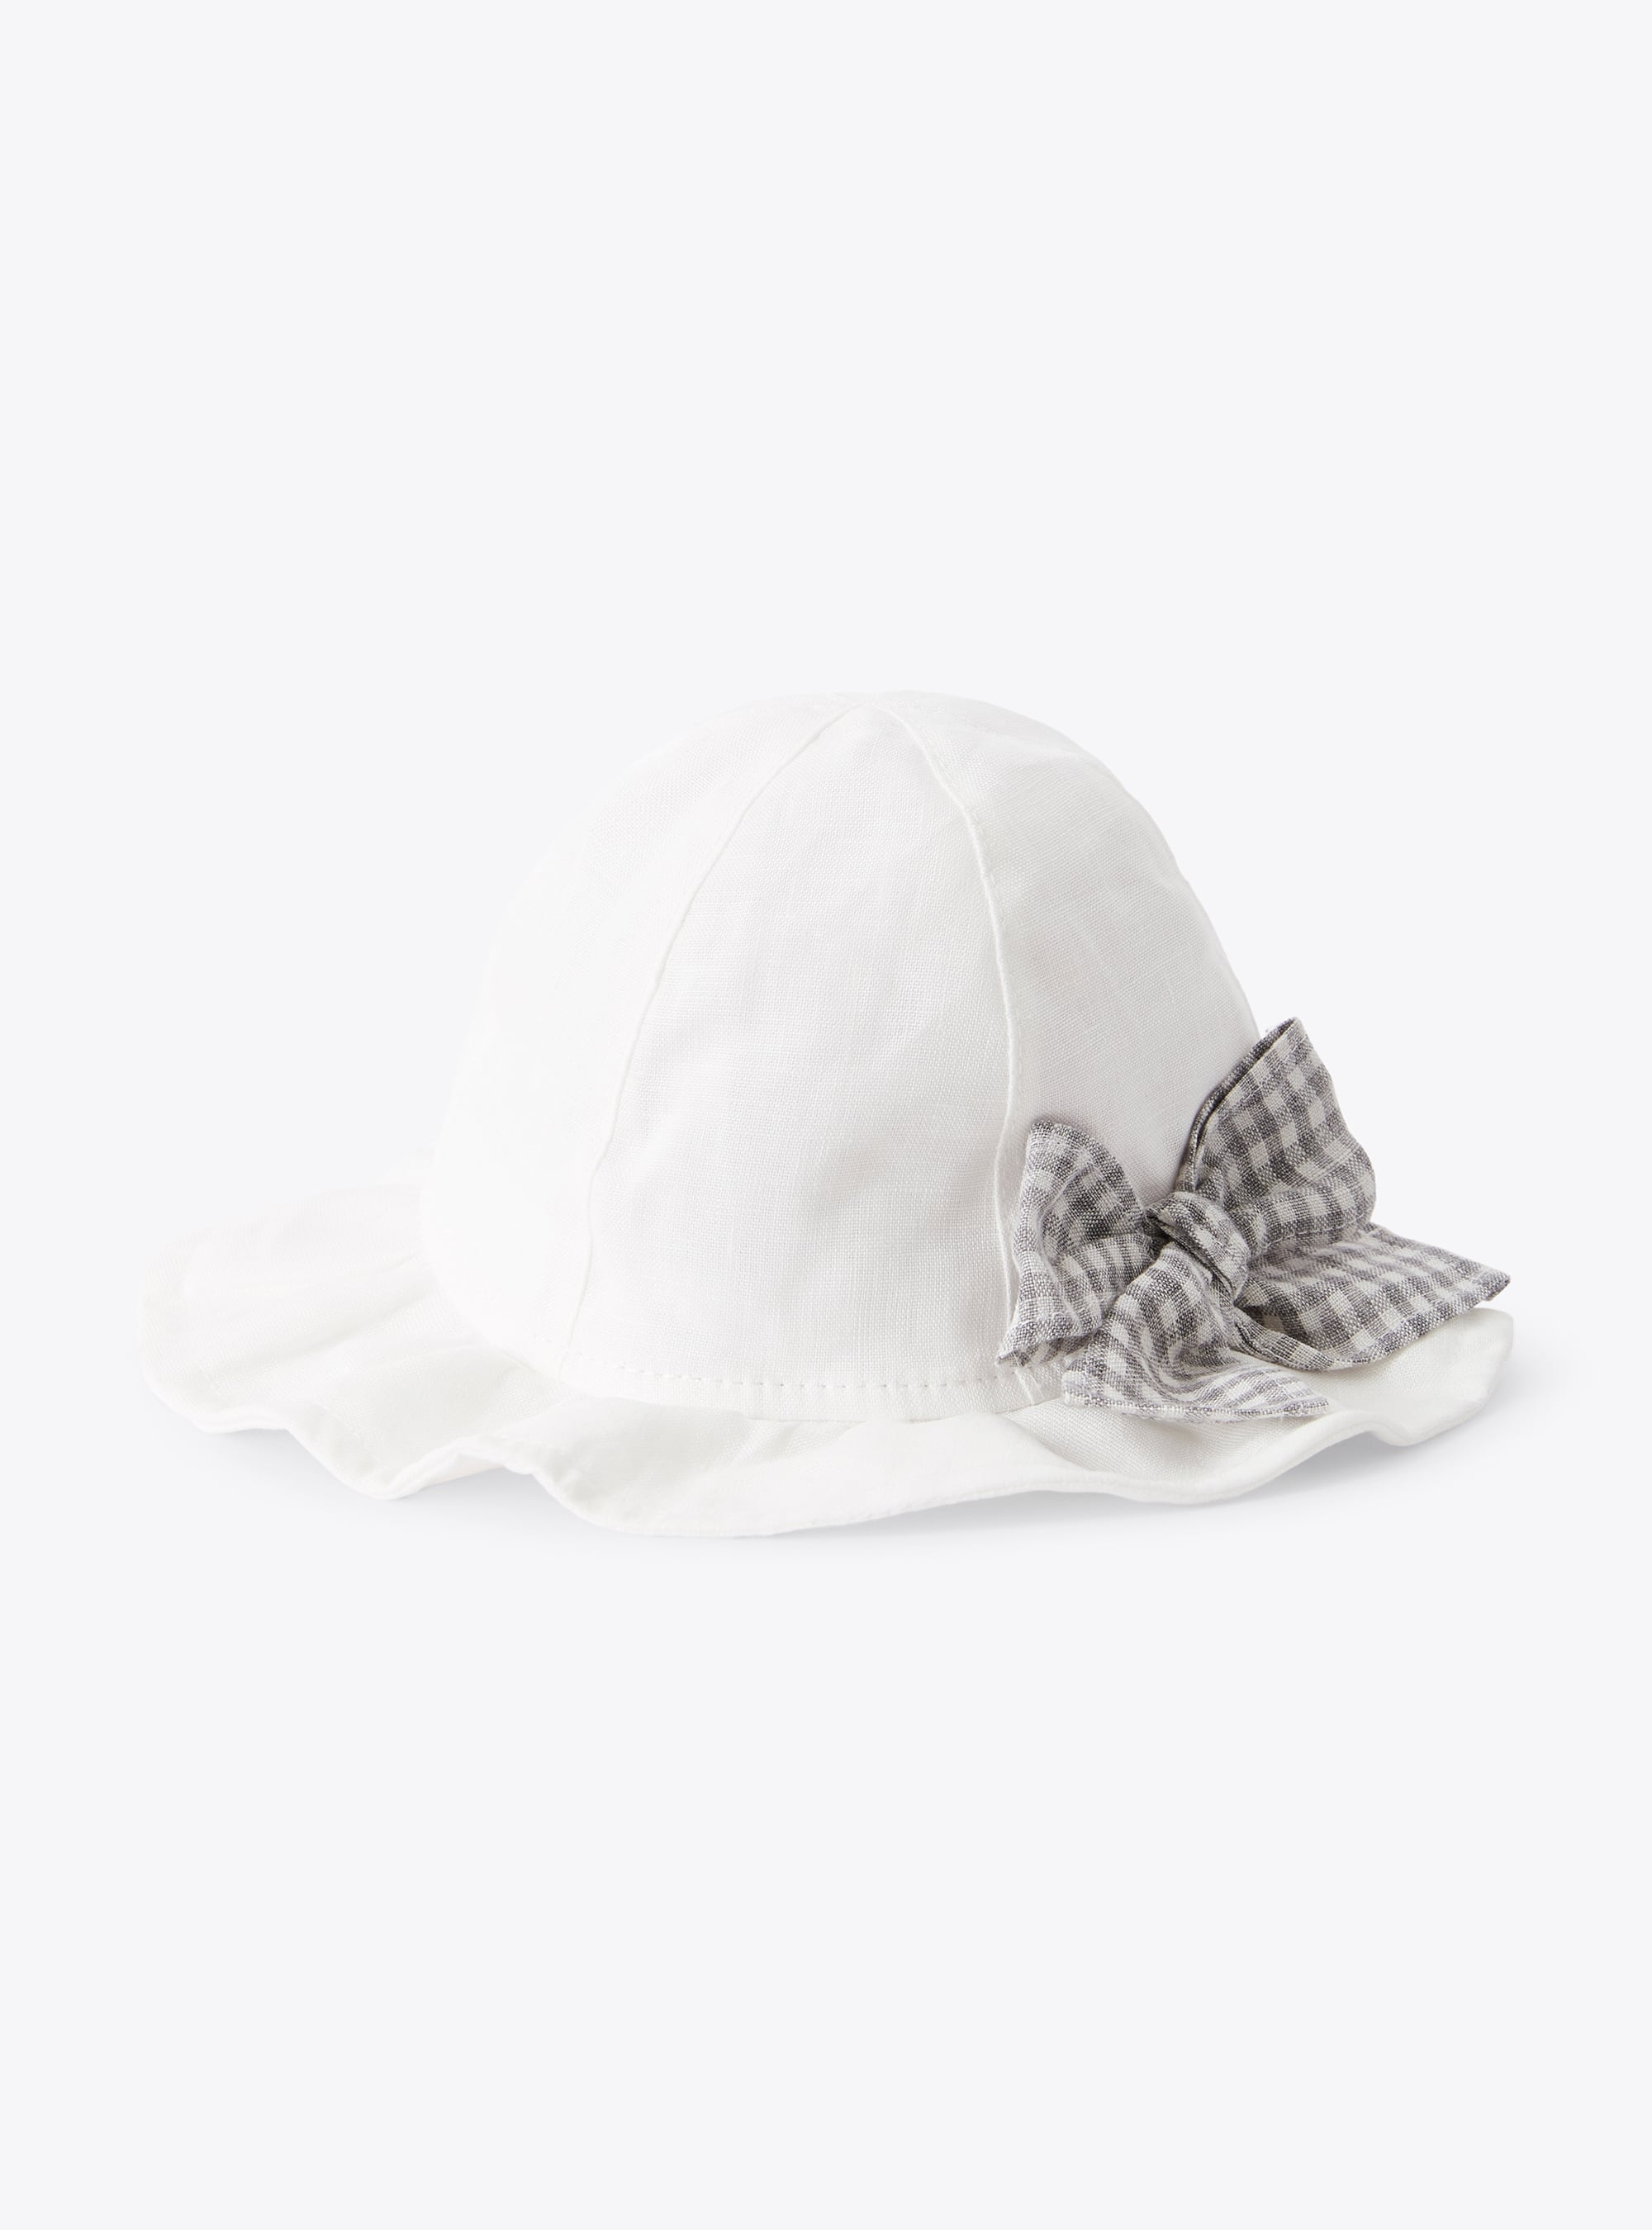 Linen hat with gingham-check bow - Accessories - Il Gufo